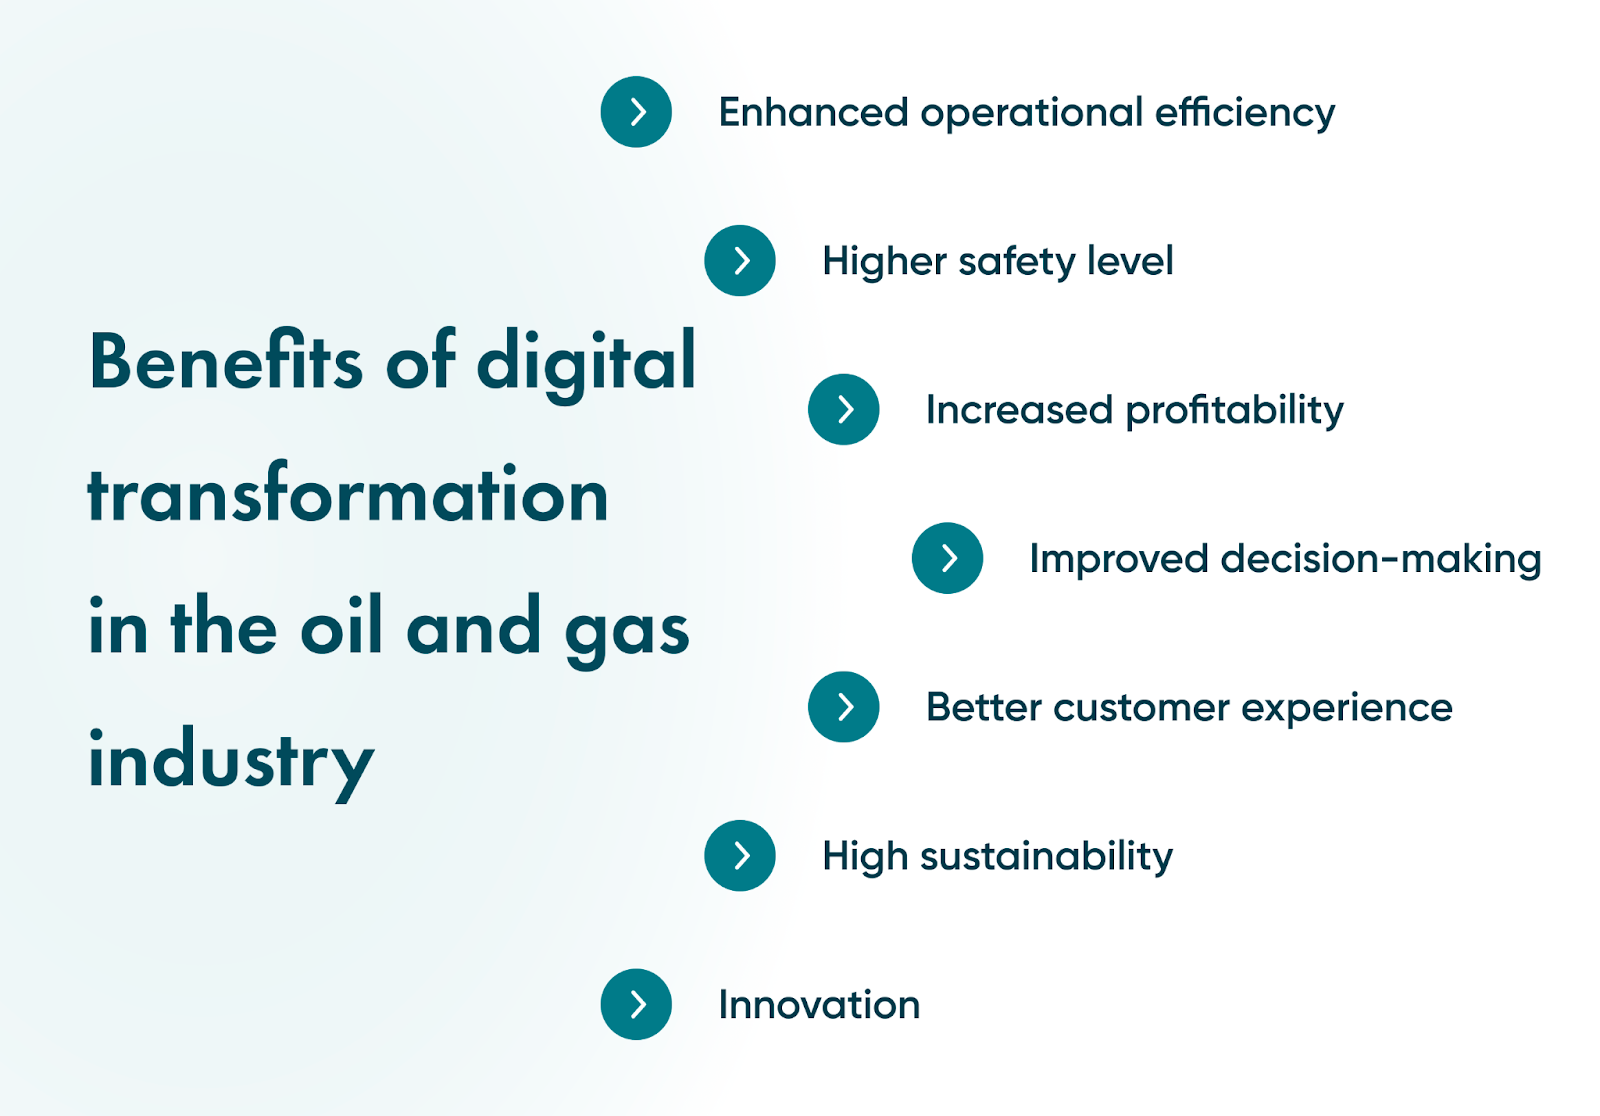 Technology in the oil and gas industry can give many benefits to your business if you implement them wisely and effectively. Let’s check out all the pros of digital transformation.